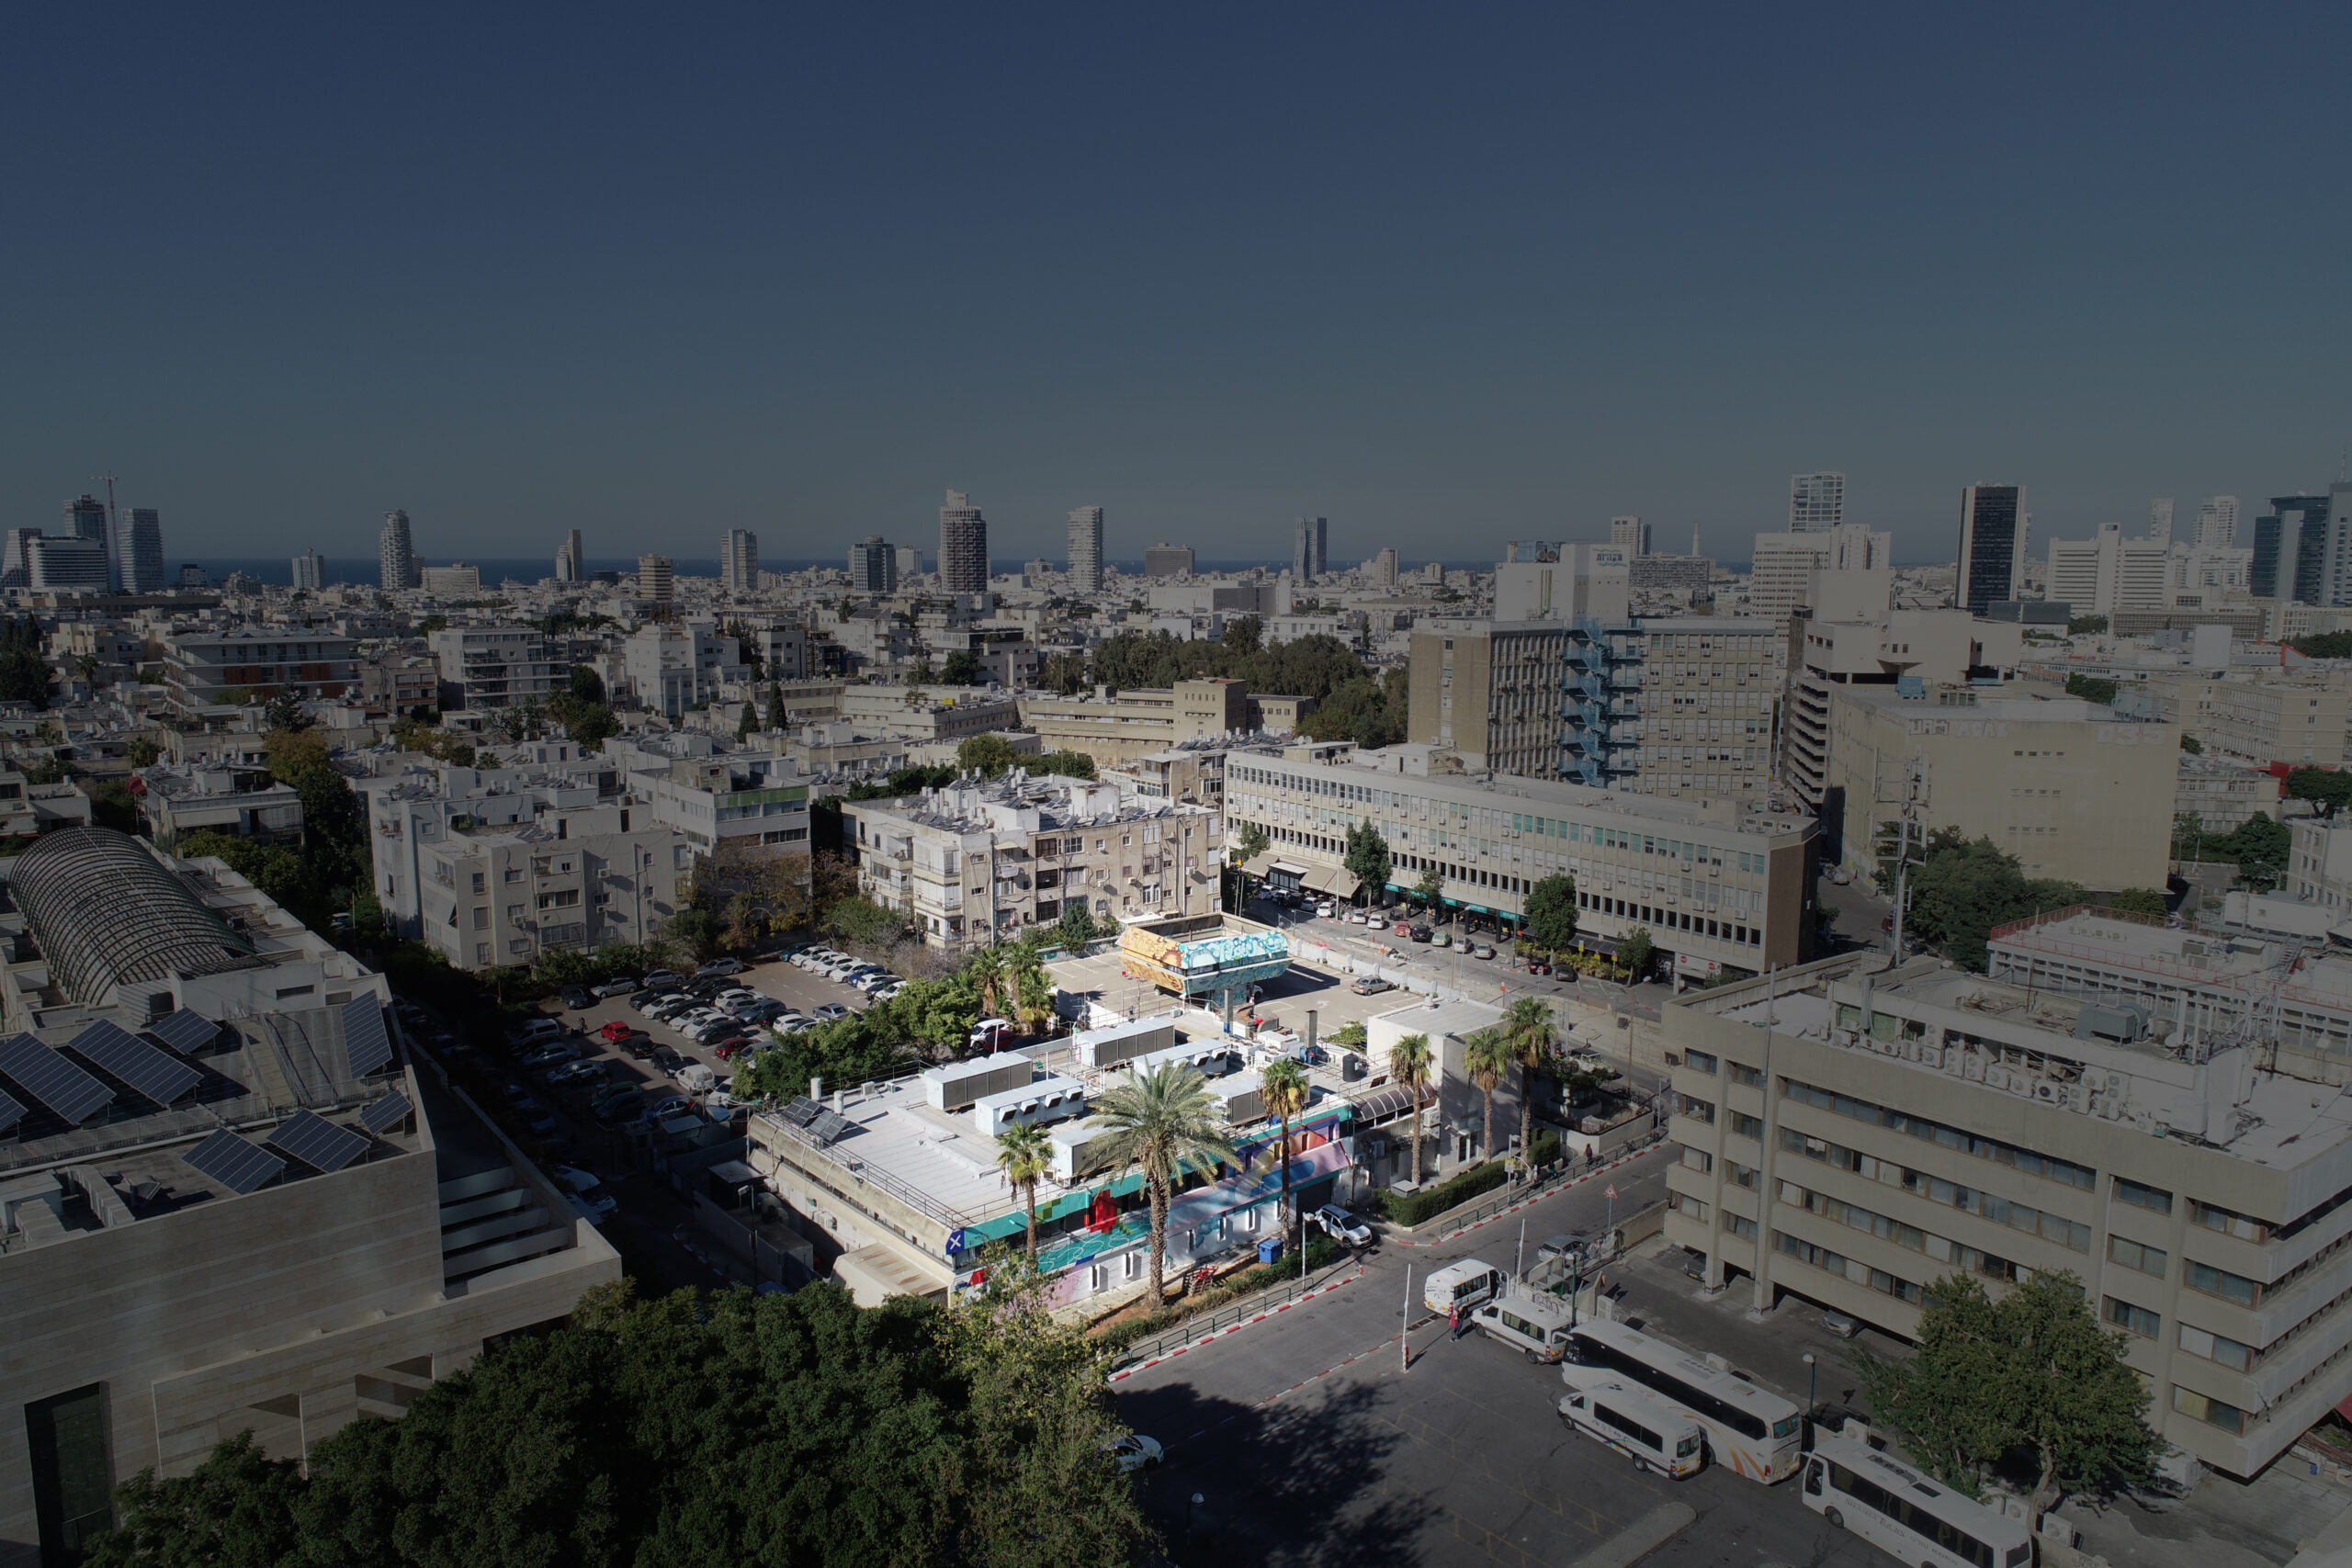 Lincoln 16: A value-add development at the convergence of Lincoln, Saadia Gaon, and Lloyd George Streets in Tel Aviv | Unique interim-use project supporting the community | Reality the Leading Group of Real Estate Investment Funds in Israel